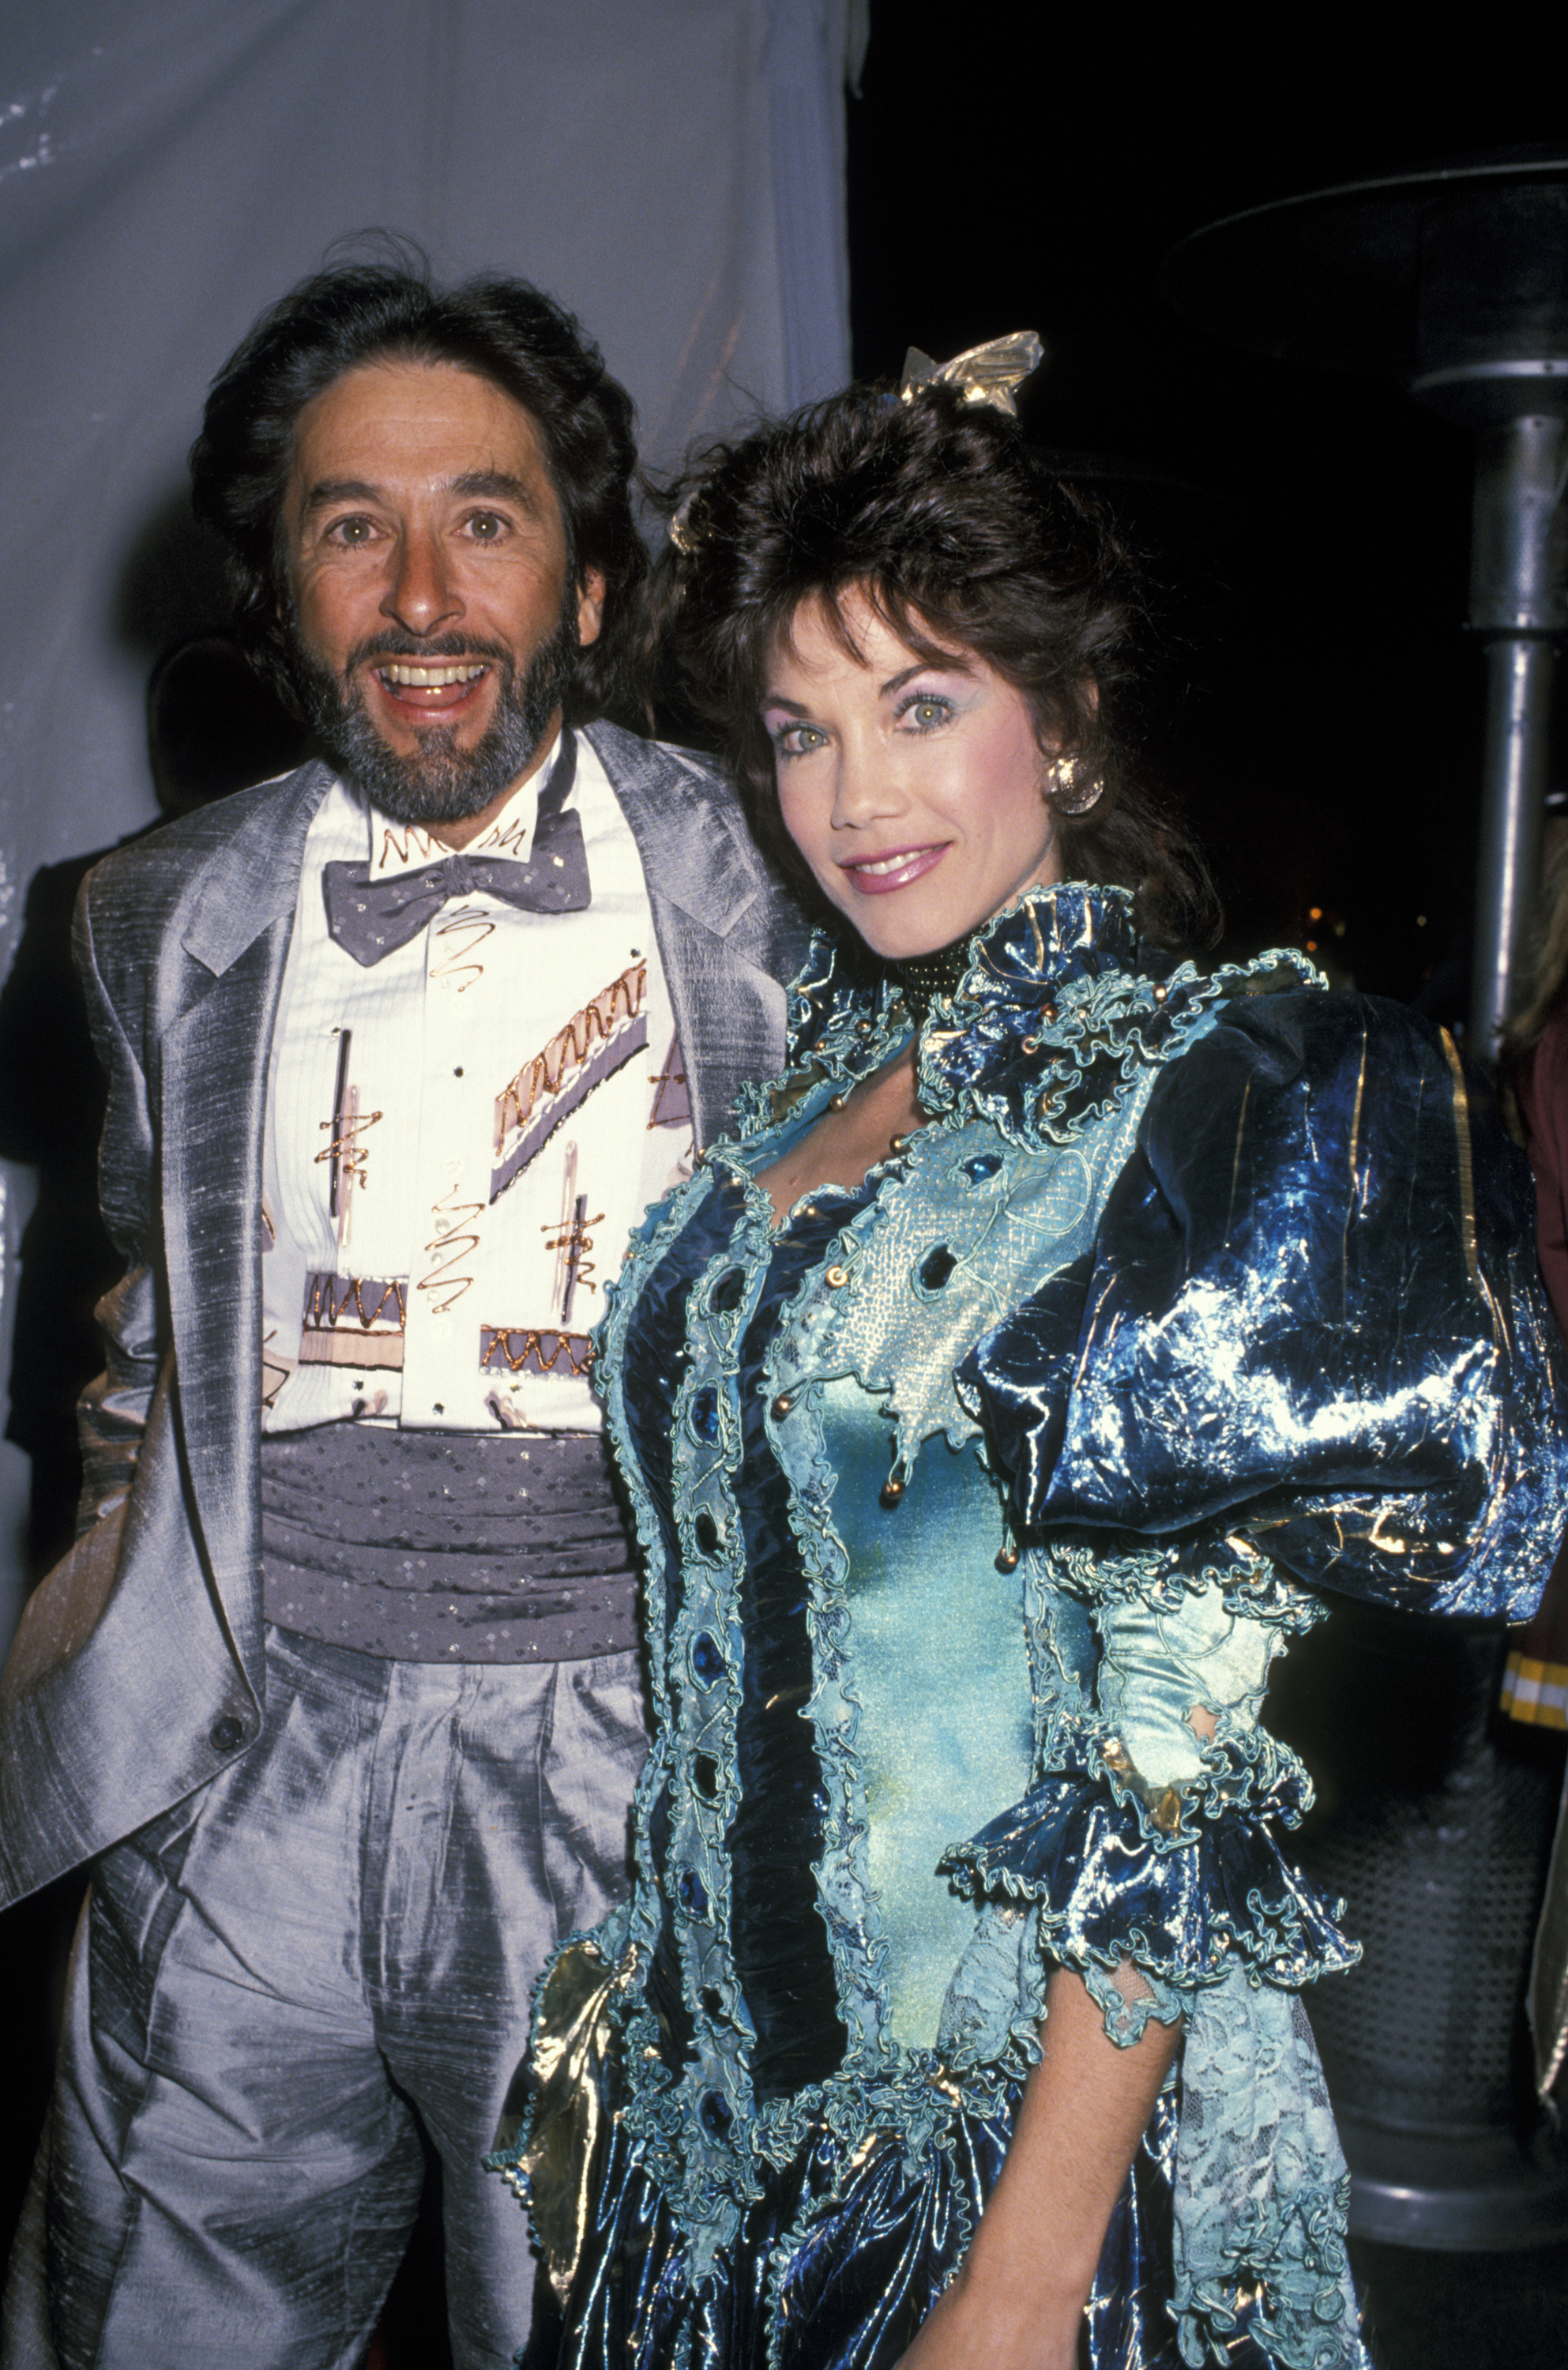 George Gradow and Barbi Benton in Los Angeles in 1989 | Source: Getty Images